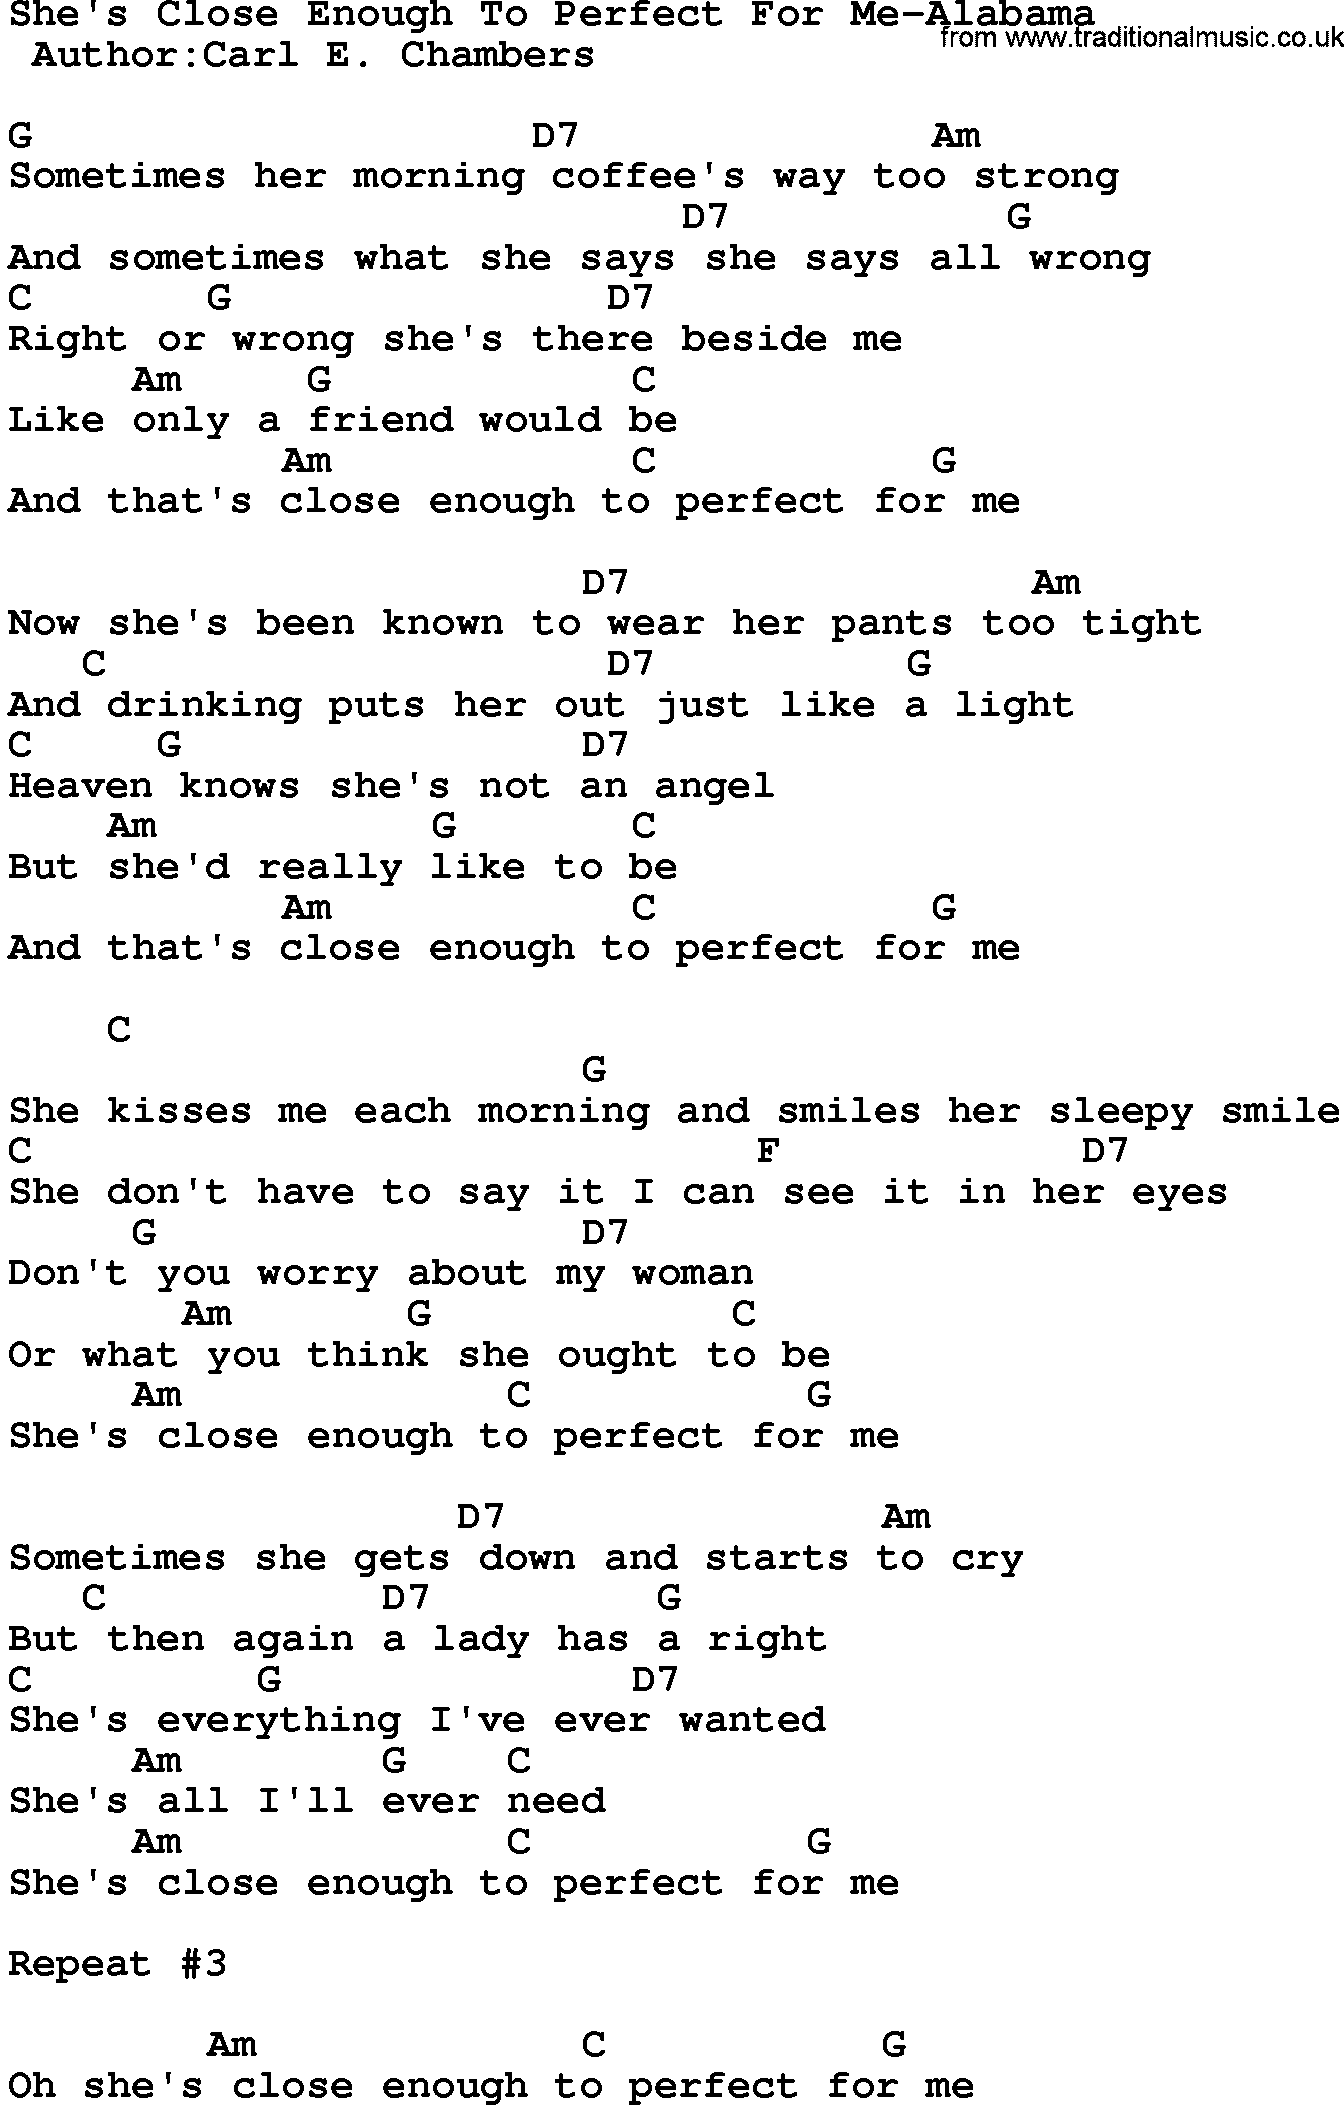 Country music song: She's Close Enough To Perfect For Me-Alabama lyrics and chords